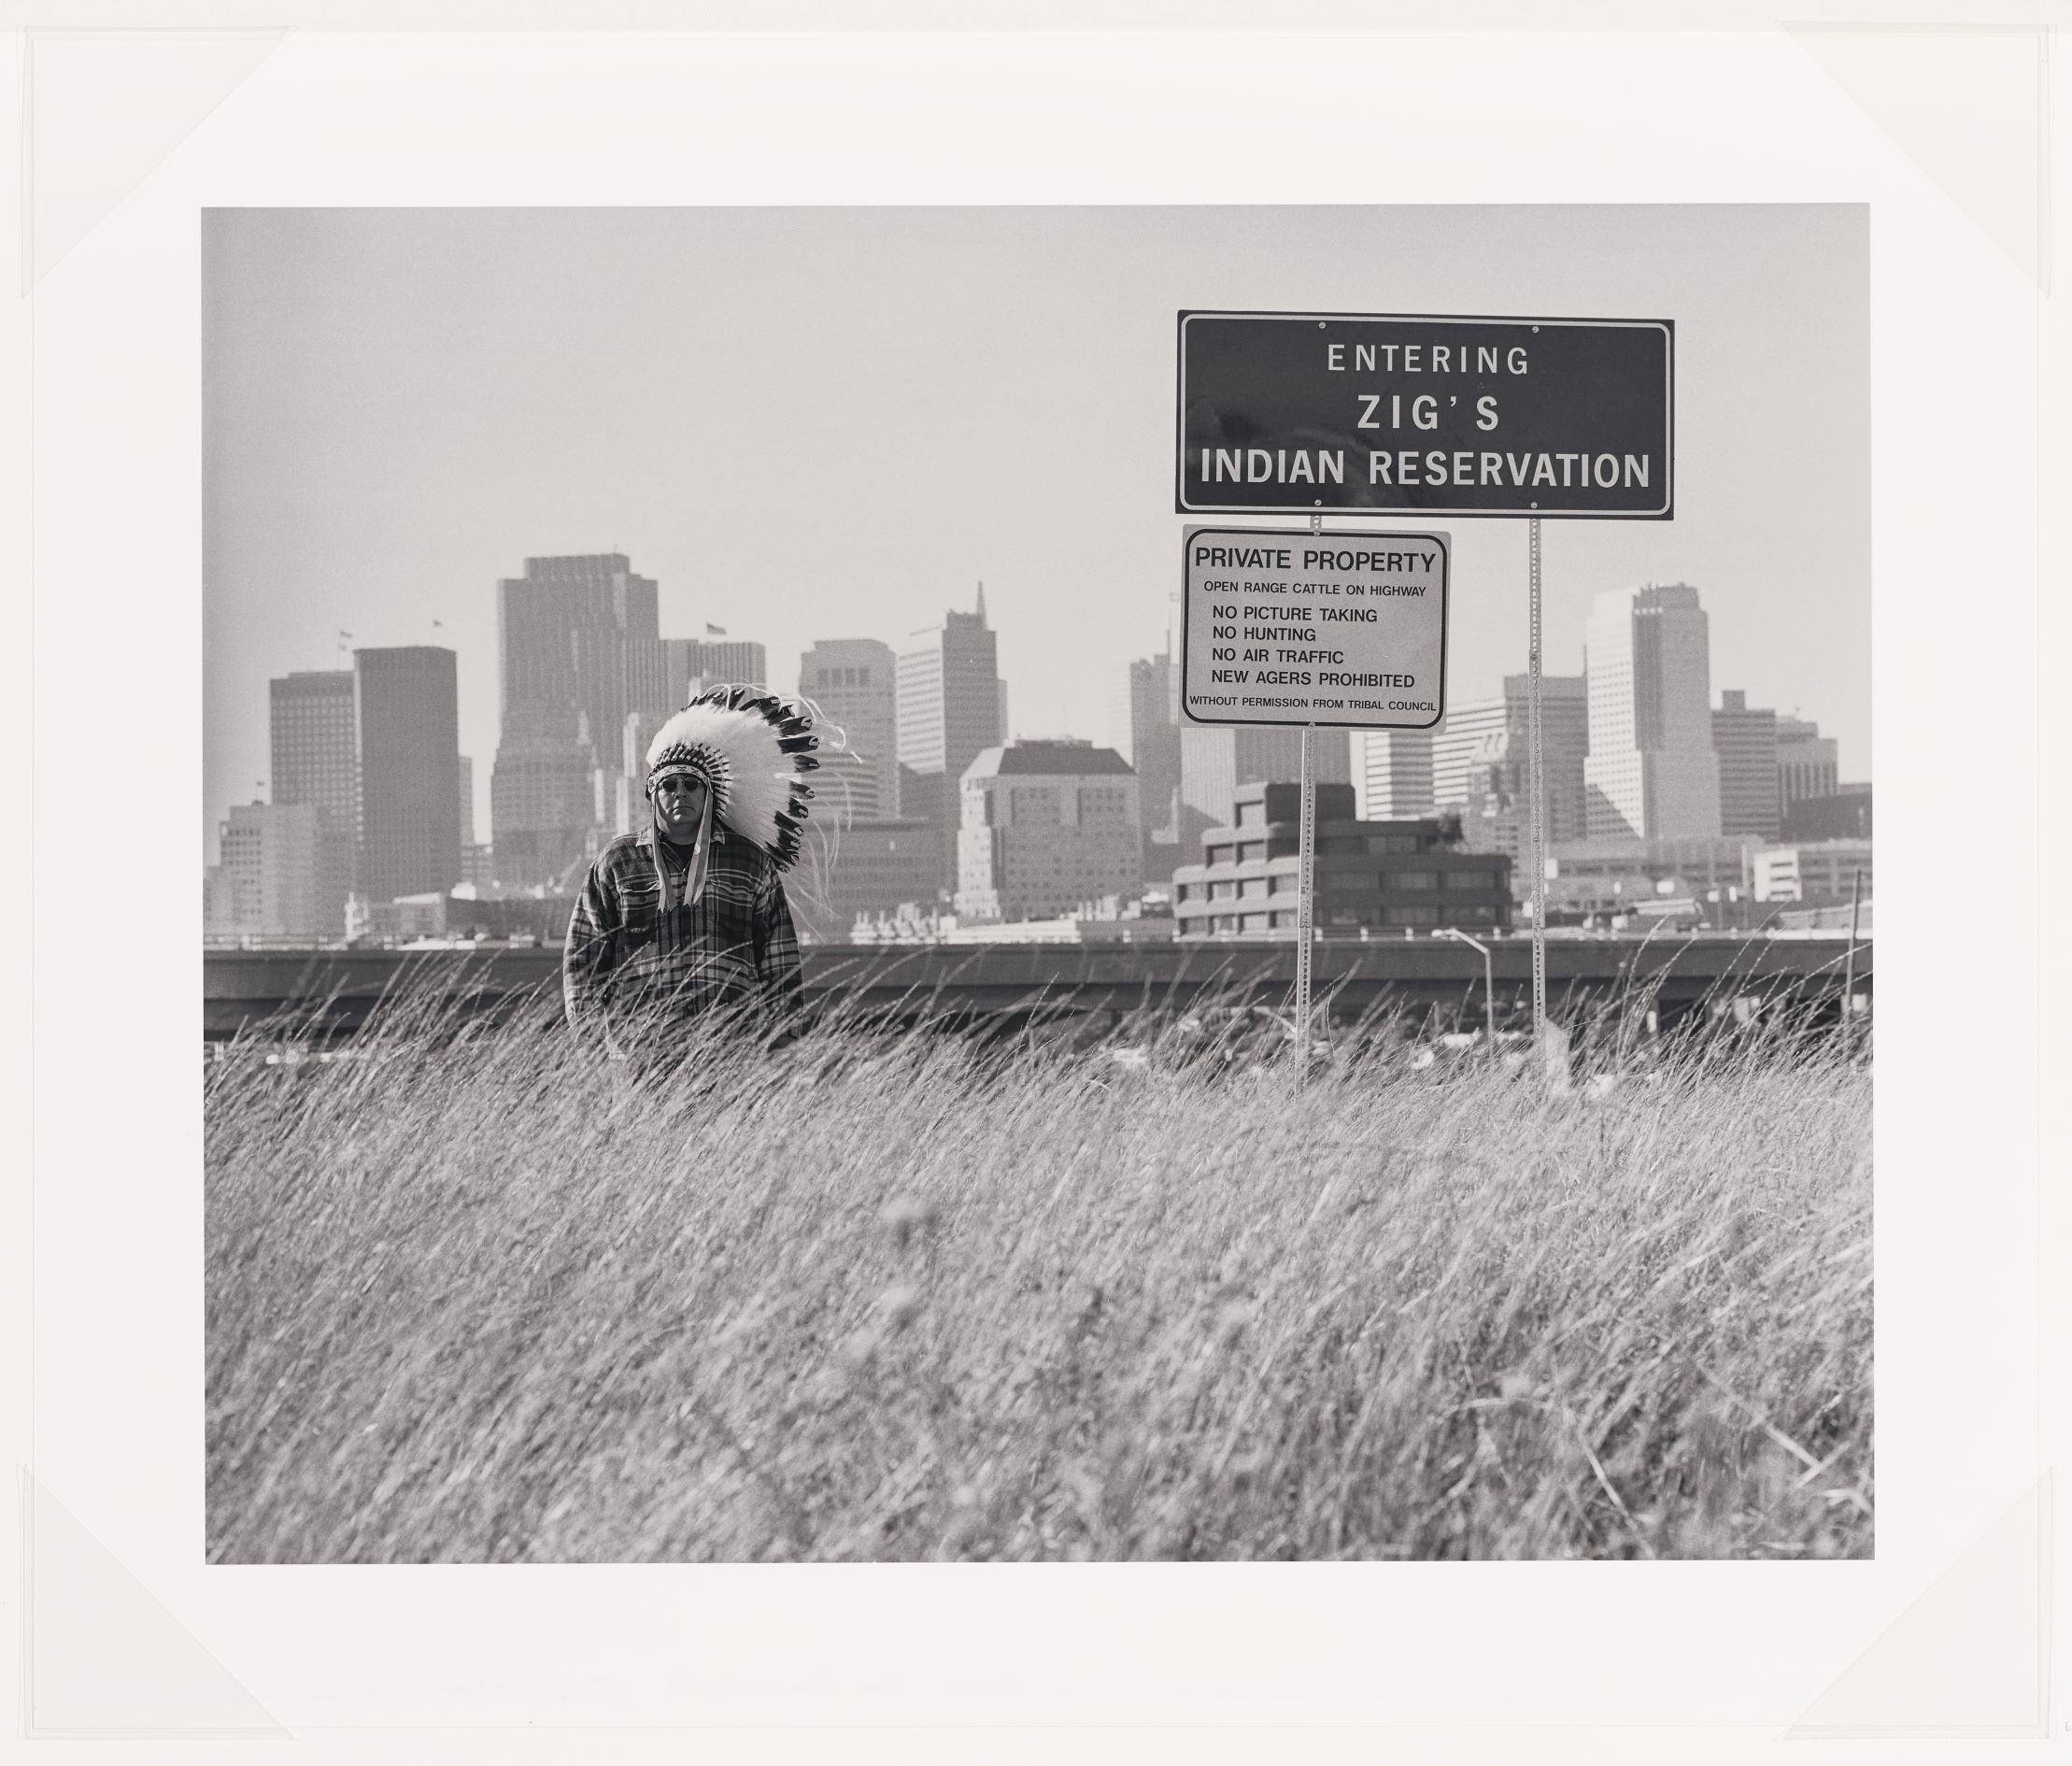 A black and white photograph that shows Zig Jackson, the artist, in a half-length portrait, standing, facing front and wearing a headdress, sunglasses, and a plaid shirt. Zig stands next to a large sign in the style of a city or landmark sign with a dark background and white lettering that states "Entering Zig’s Indian Reservation." Below is a smaller white sign with black lettering that states: "Private Property, open range cattle on highway, No Picture Taking, No Hunting, No Air Traffic, New Agers Prohibited, without permission from Tribal Council.” Zig stands in tall grass with a highway and a cityscape of San Francisco, California behind him.